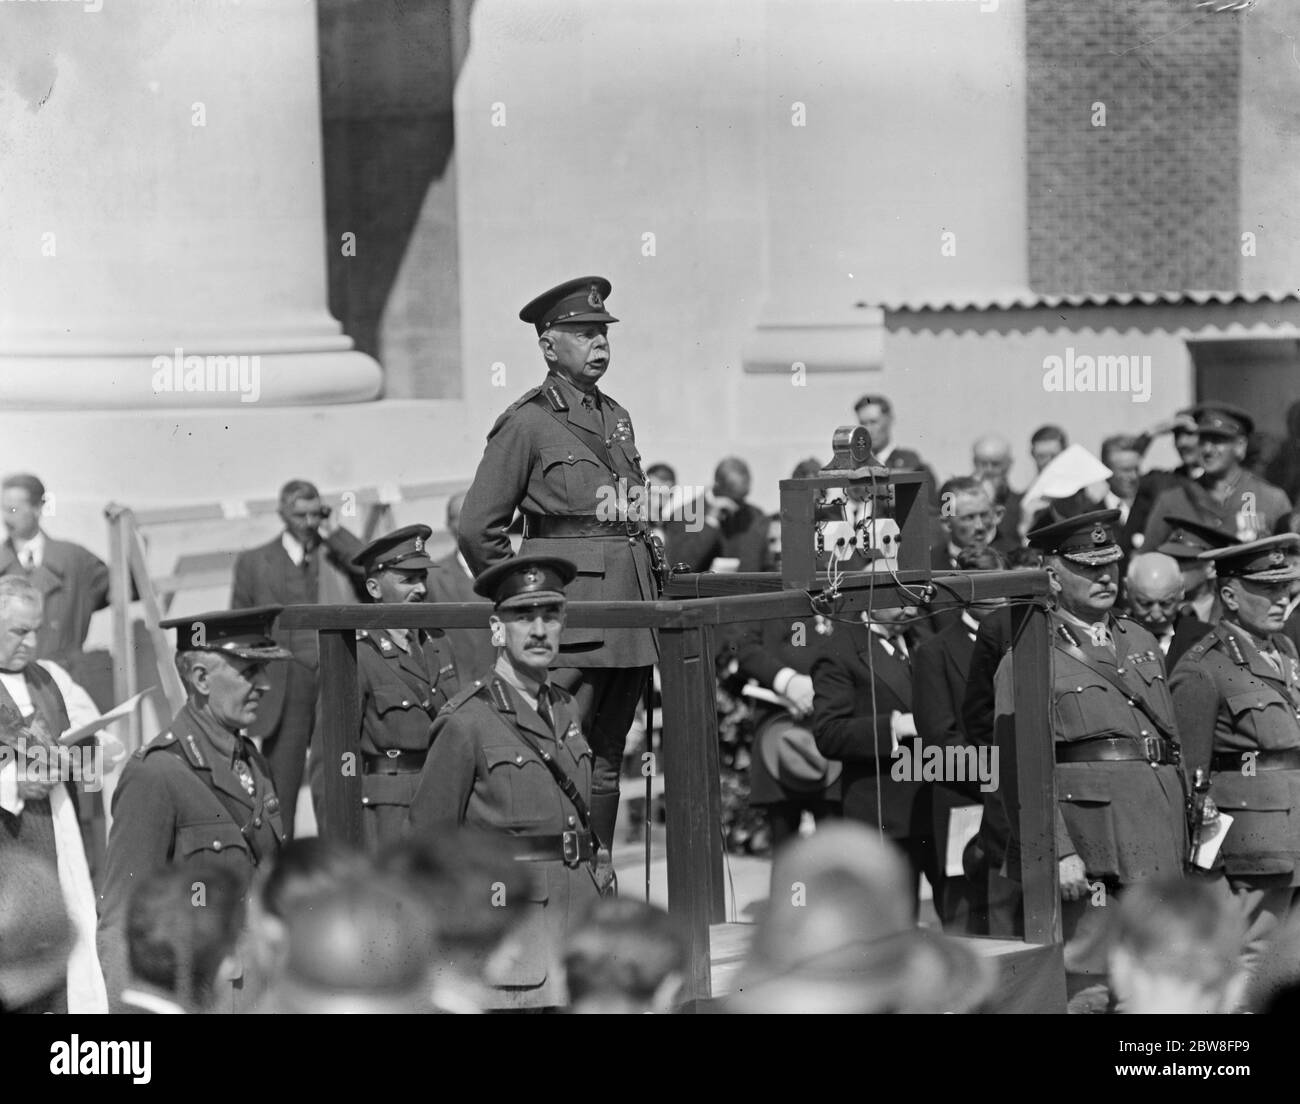 Menin Gate unveiled at Ypres, Belgium . Field Marshal Lord Plumer speaking after the unveiling . 24 July 1927 Stock Photo